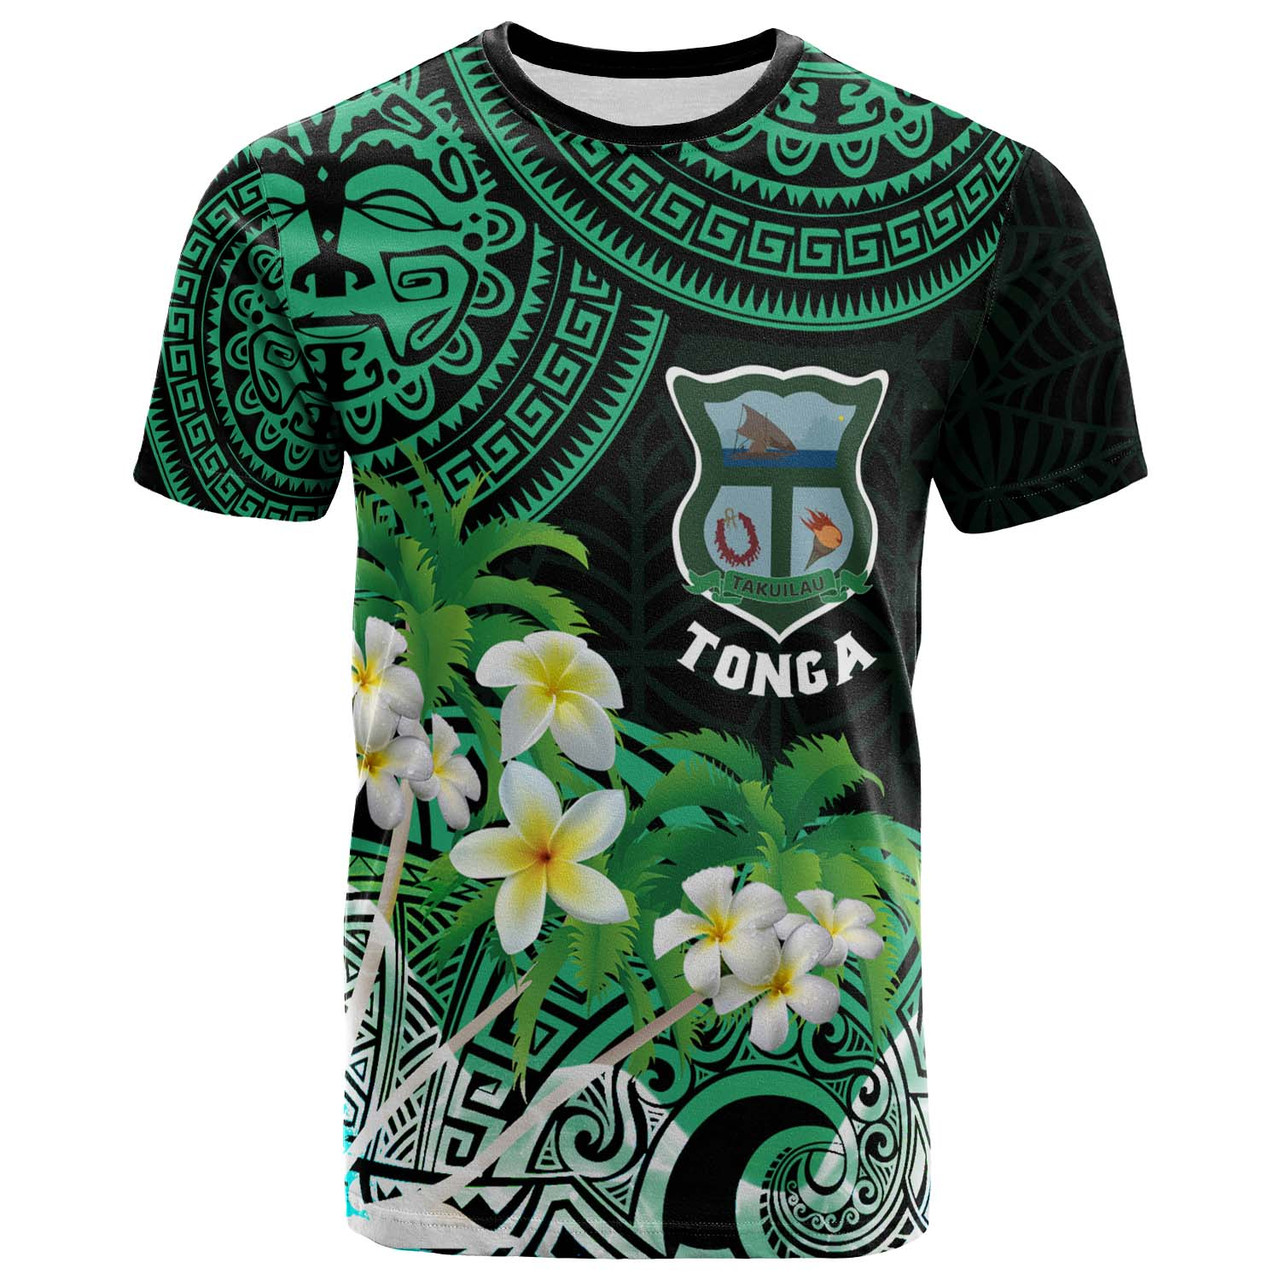 Tonga Custom T-shirt - Takuilau College with Polynesian Patterns and Plumeria Flower